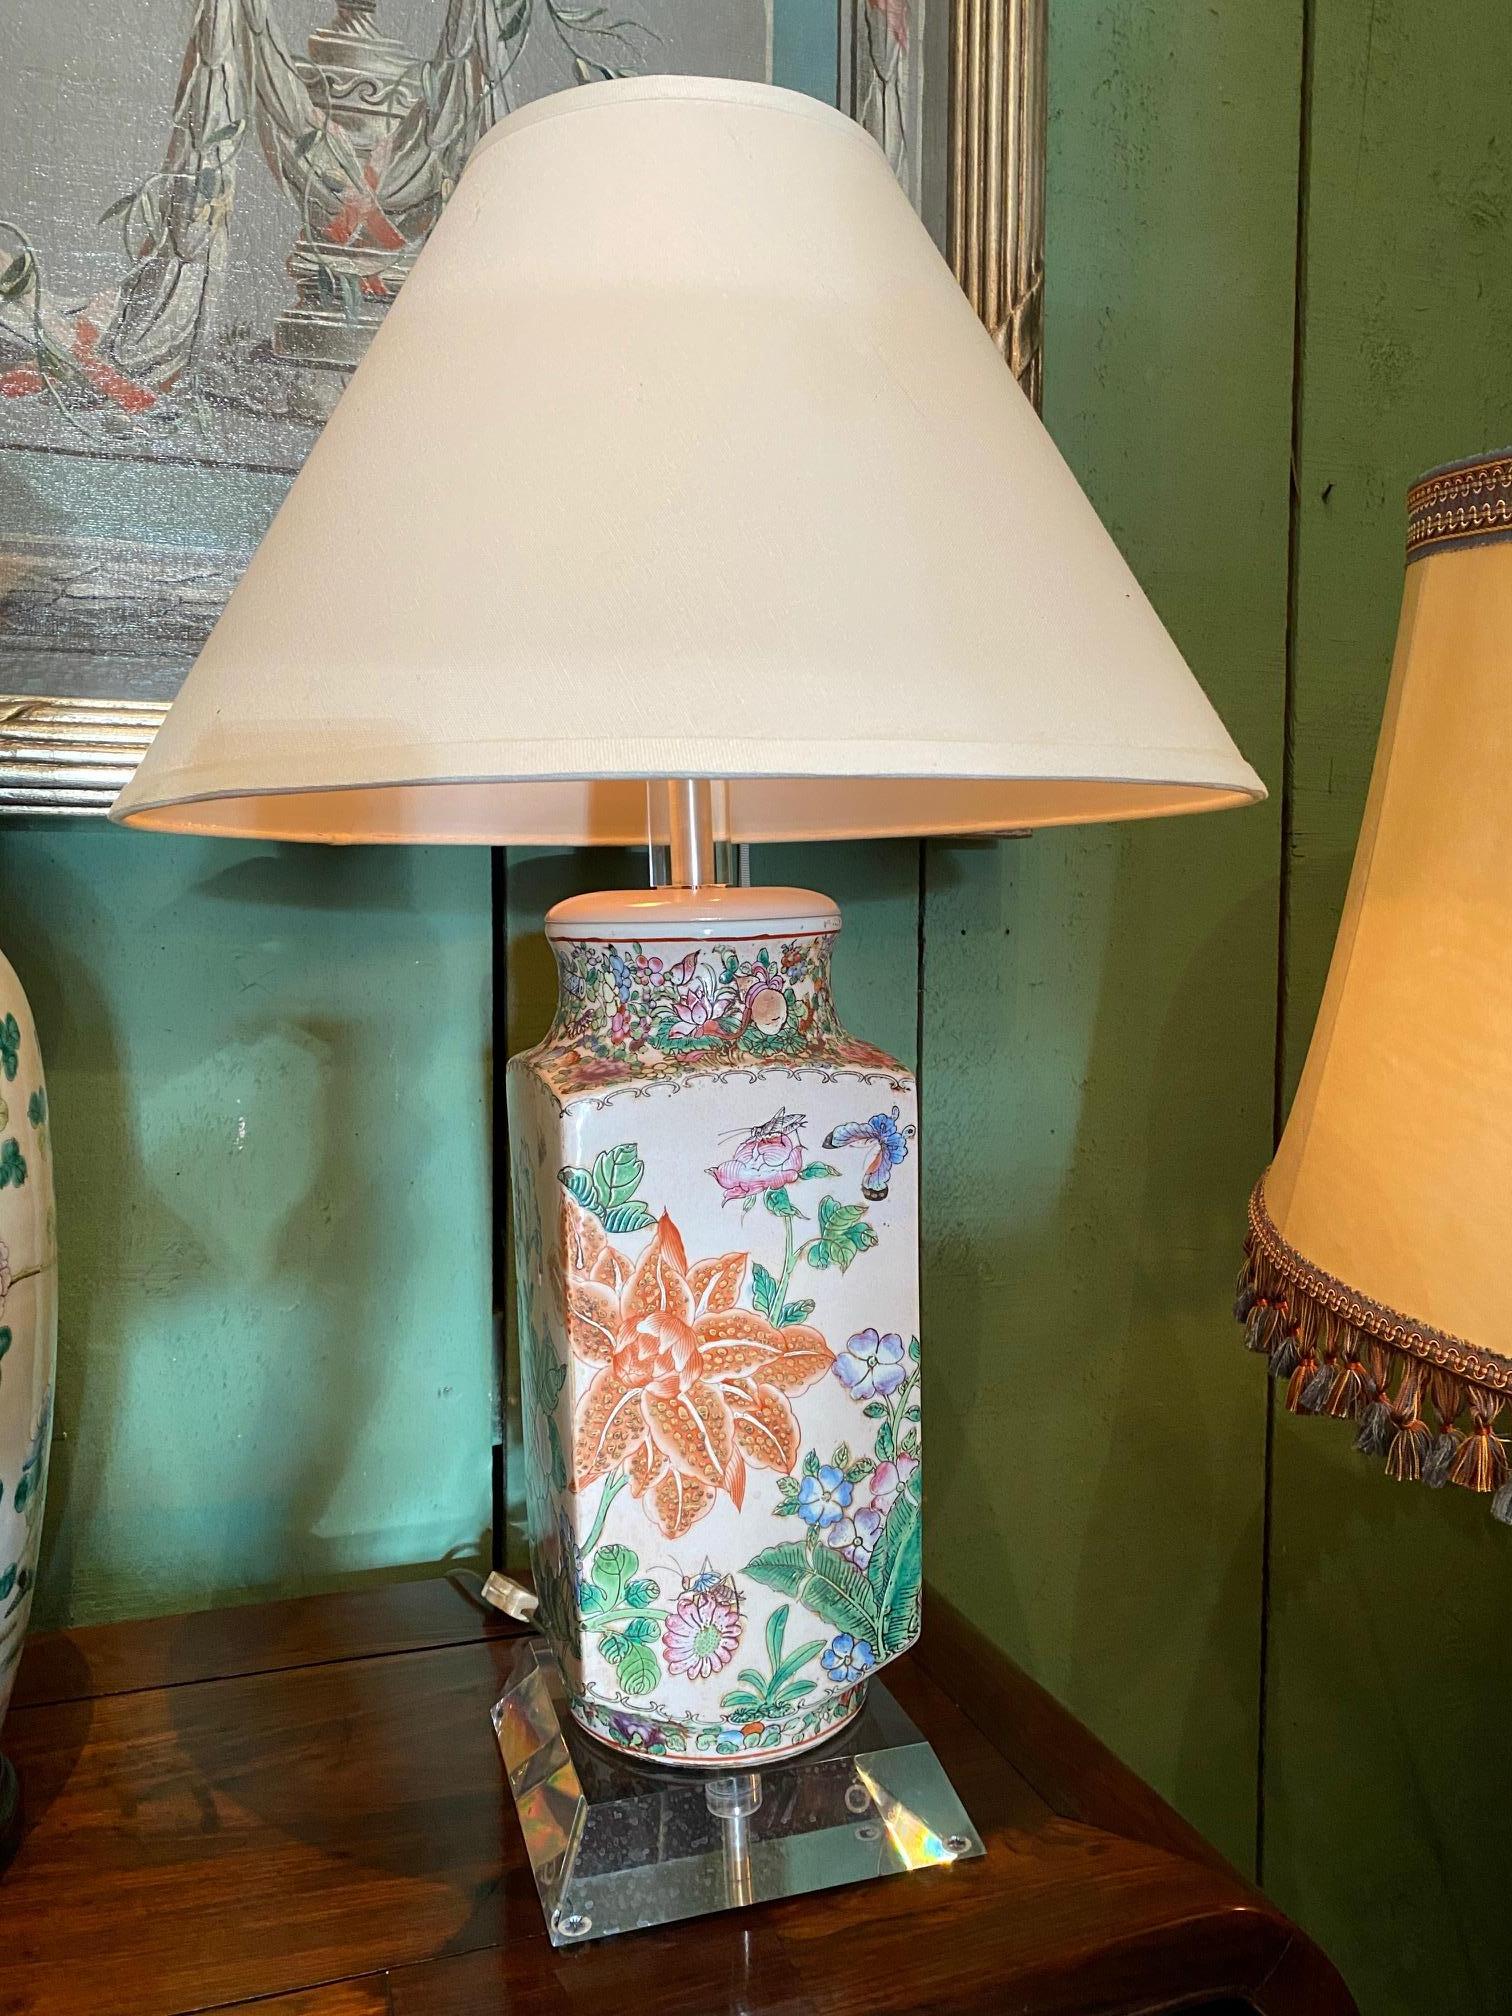 Pair of beautiful 19th century chinoiserie oriental vases with plexiglass mounts wired as lamps With Simple Old handmade shades. Square vases Decorated with an array of symbolic flowers in blue and white, pink and orange. The flowers rises from the